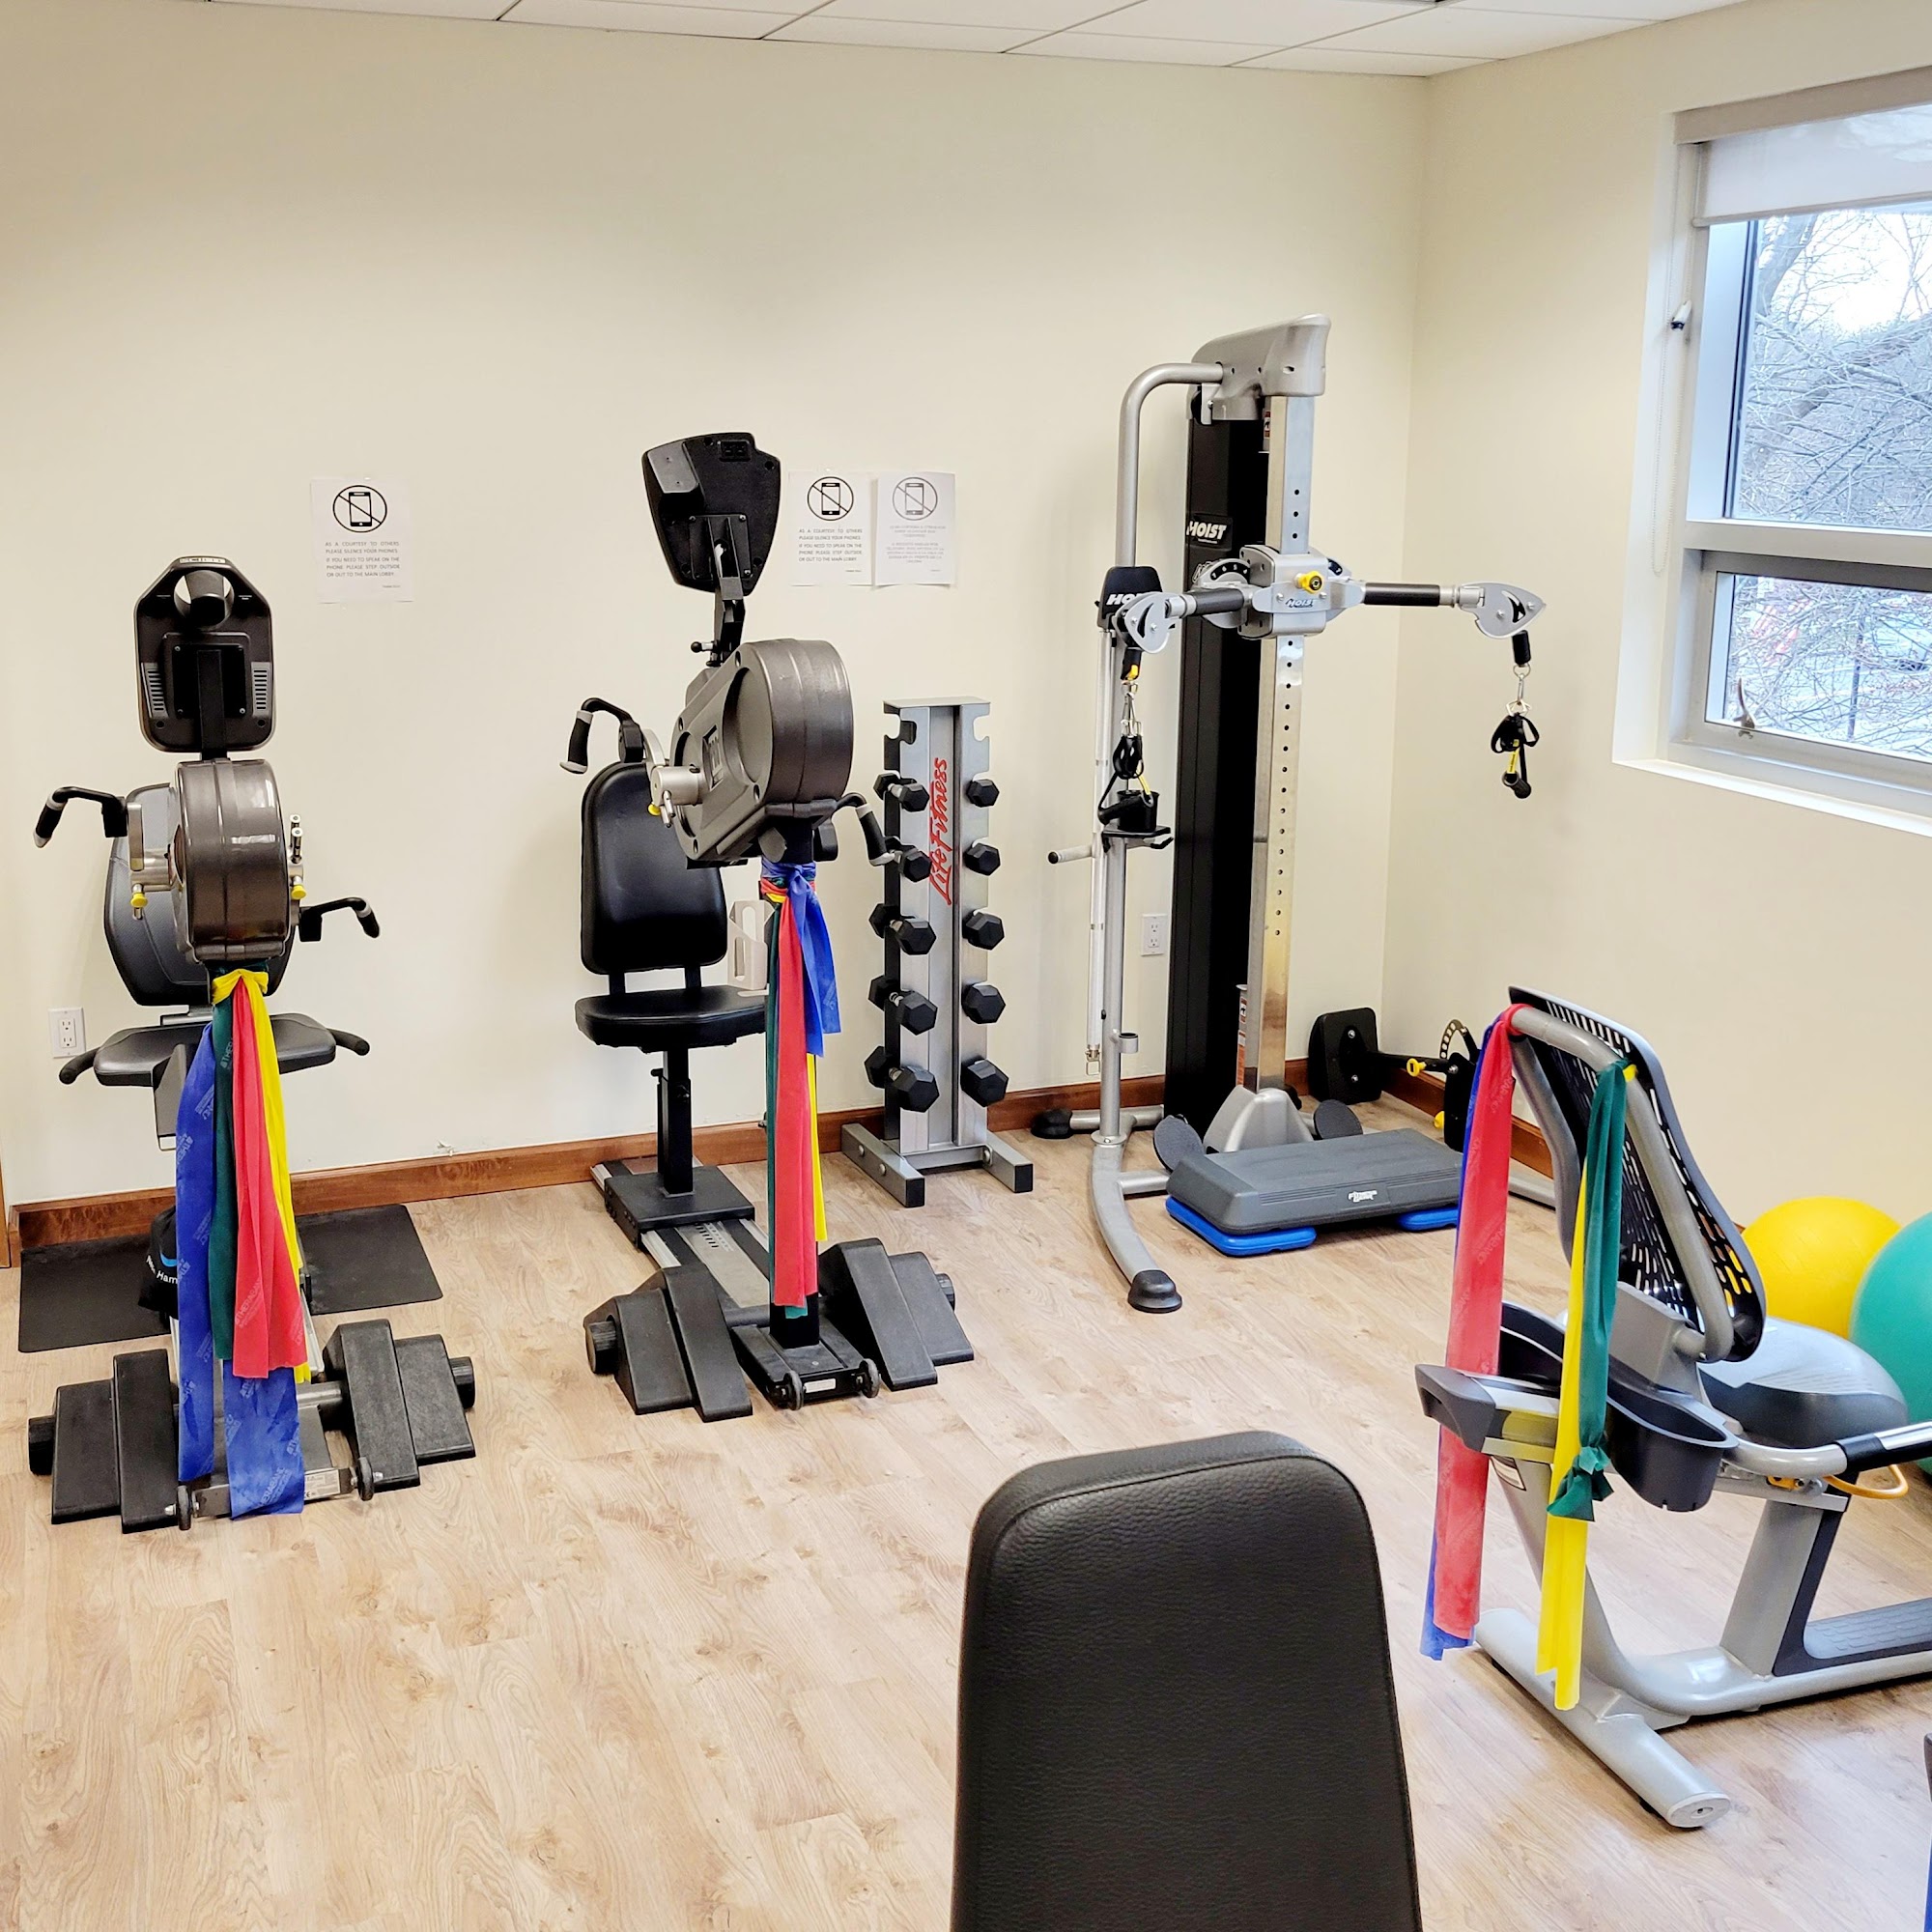 Suffolk Physical Therapy & Chiropractic